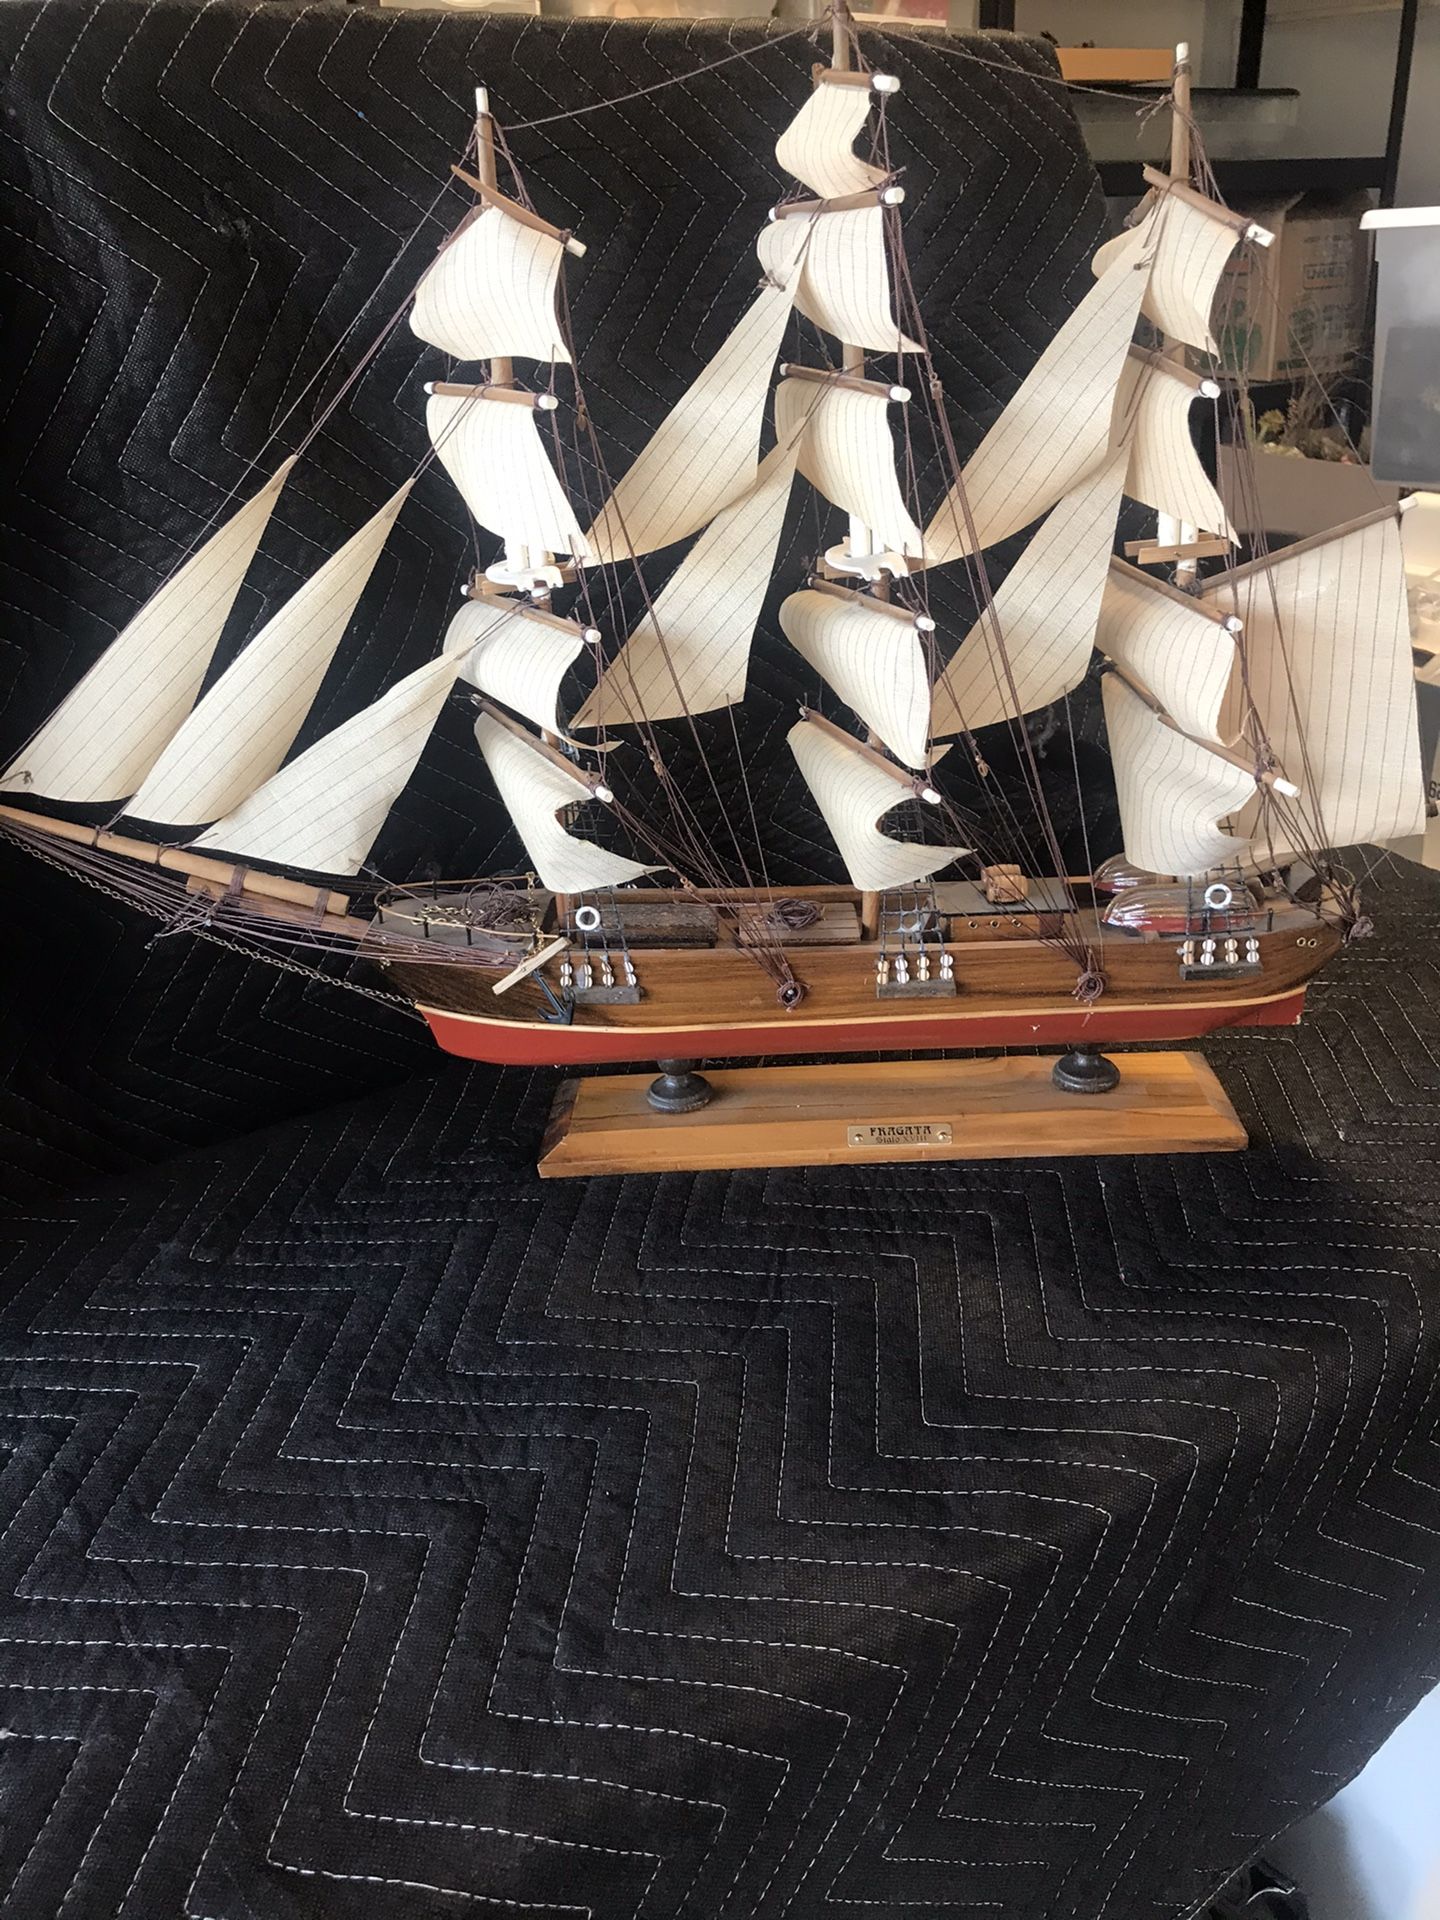 Ship Model for display... Labeled, “Fragata”... great for display in den or boys room. It’s good size, in fair shape. Looks good, I would use it in a